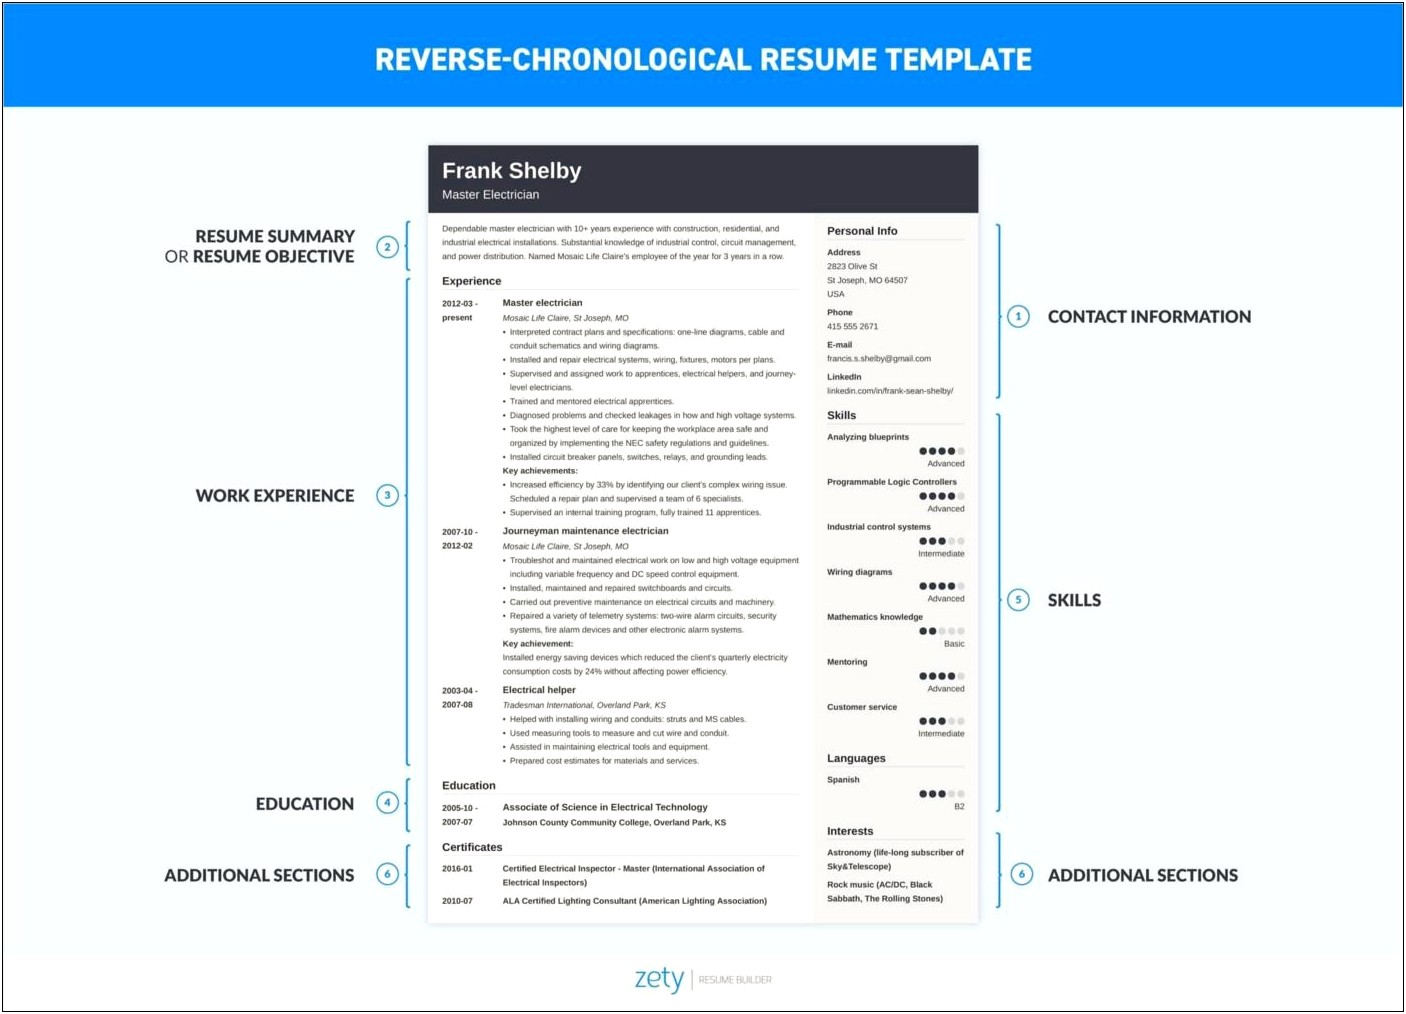 Do Jobs On Resume Need To Be Chronological